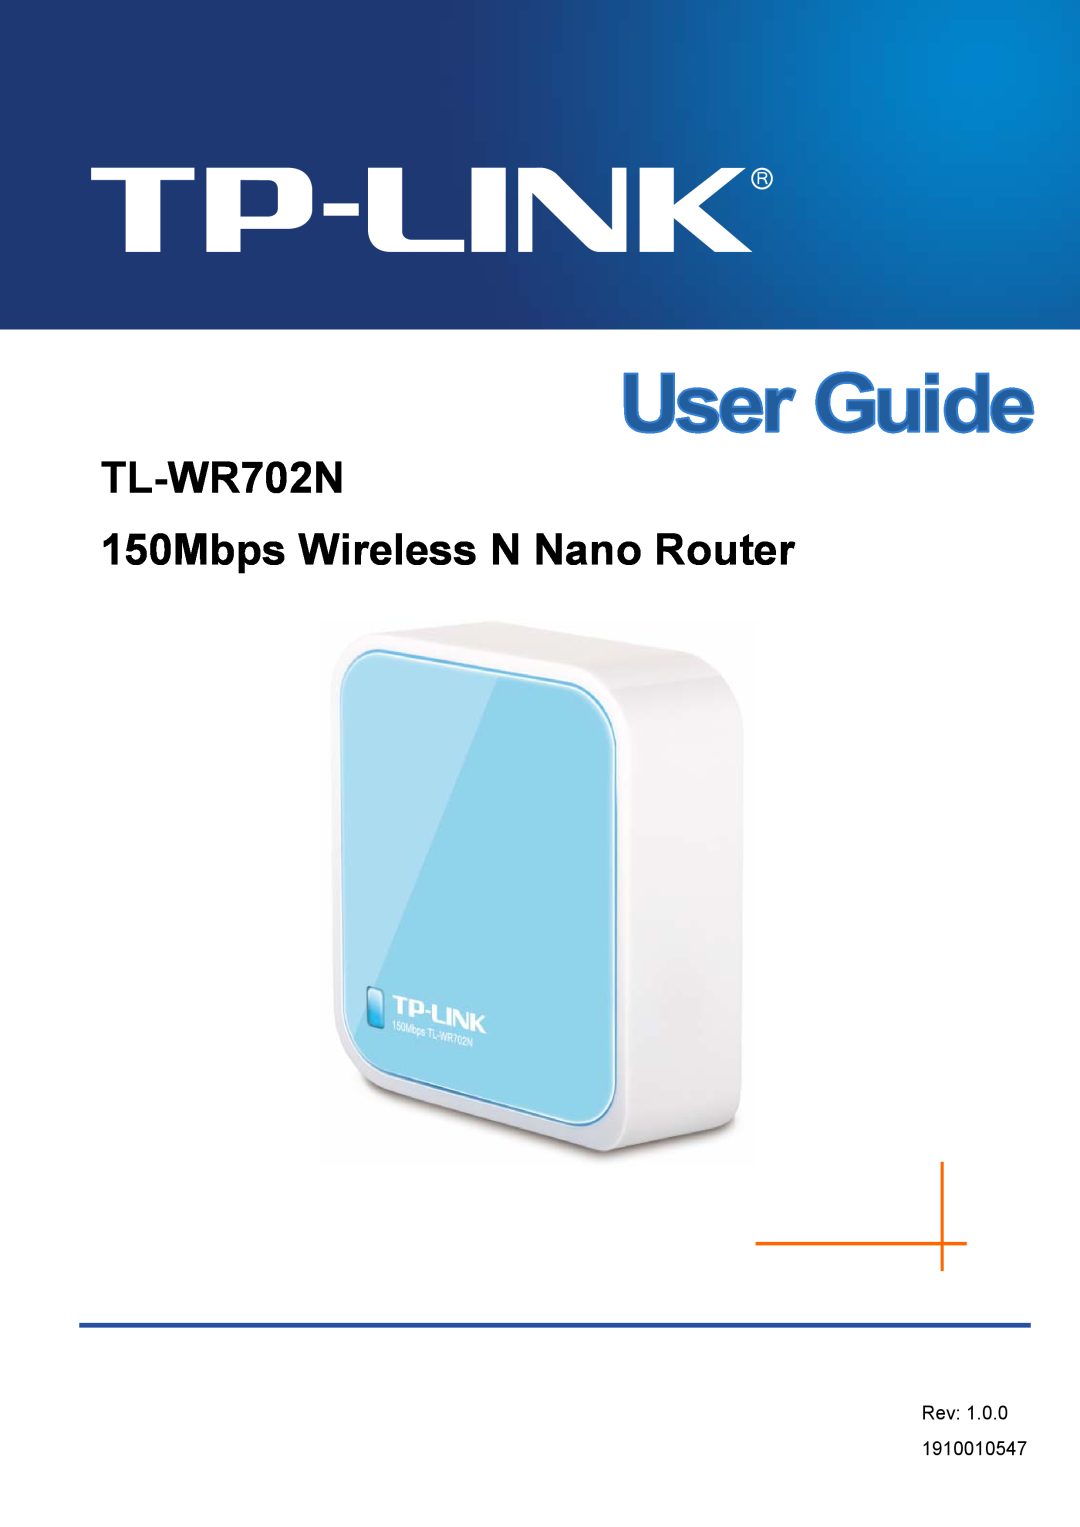 TP-Link manual TL-WR702N 150Mbps Wireless N Nano Router, Rev 1910010547 